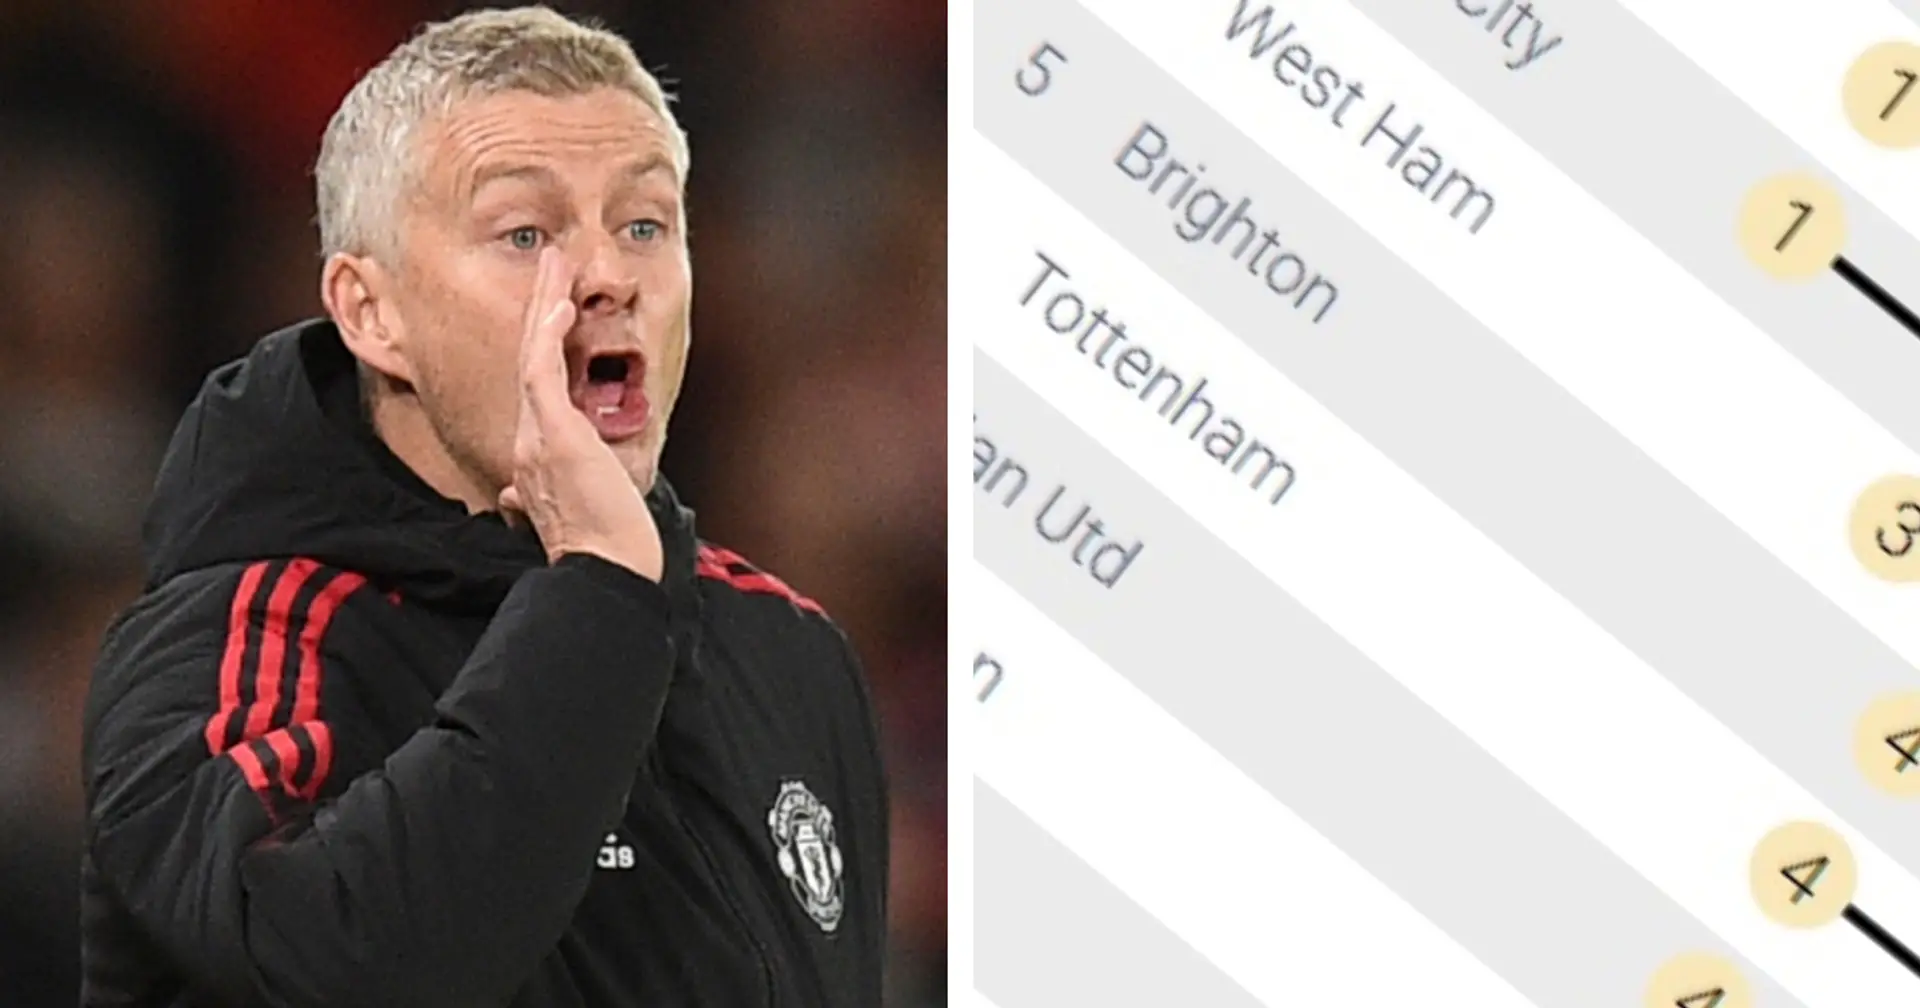 Man United could jump to 4th — or drop to 12th: how Premier League table can change this weekend